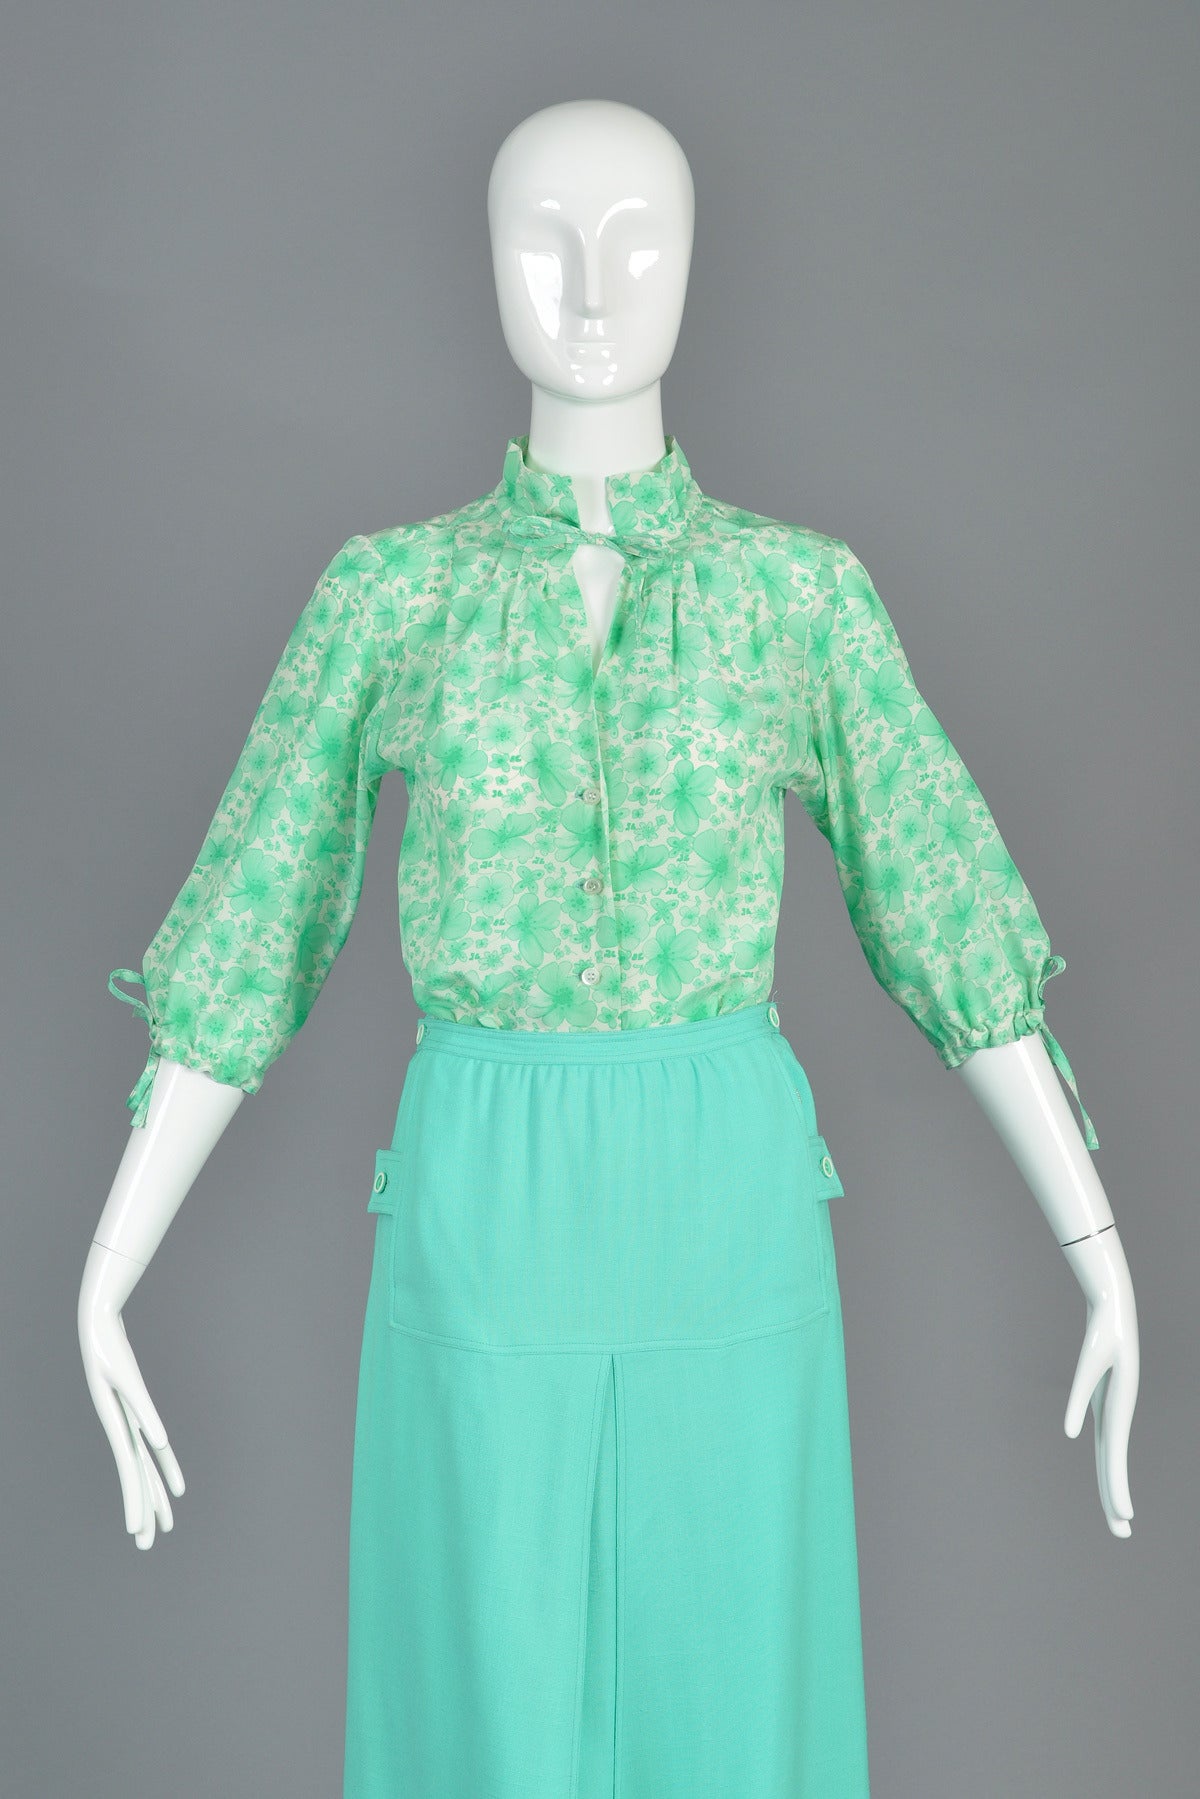 Darling vintage 1970s silk blouse by Andre Courrèges. Green all-over floral print with tiny Courrèges logos. Three quarter bloused sleeves with wrist ties. Ruffled collar with tie at neck. Button front. Excellent condition — unworn with original